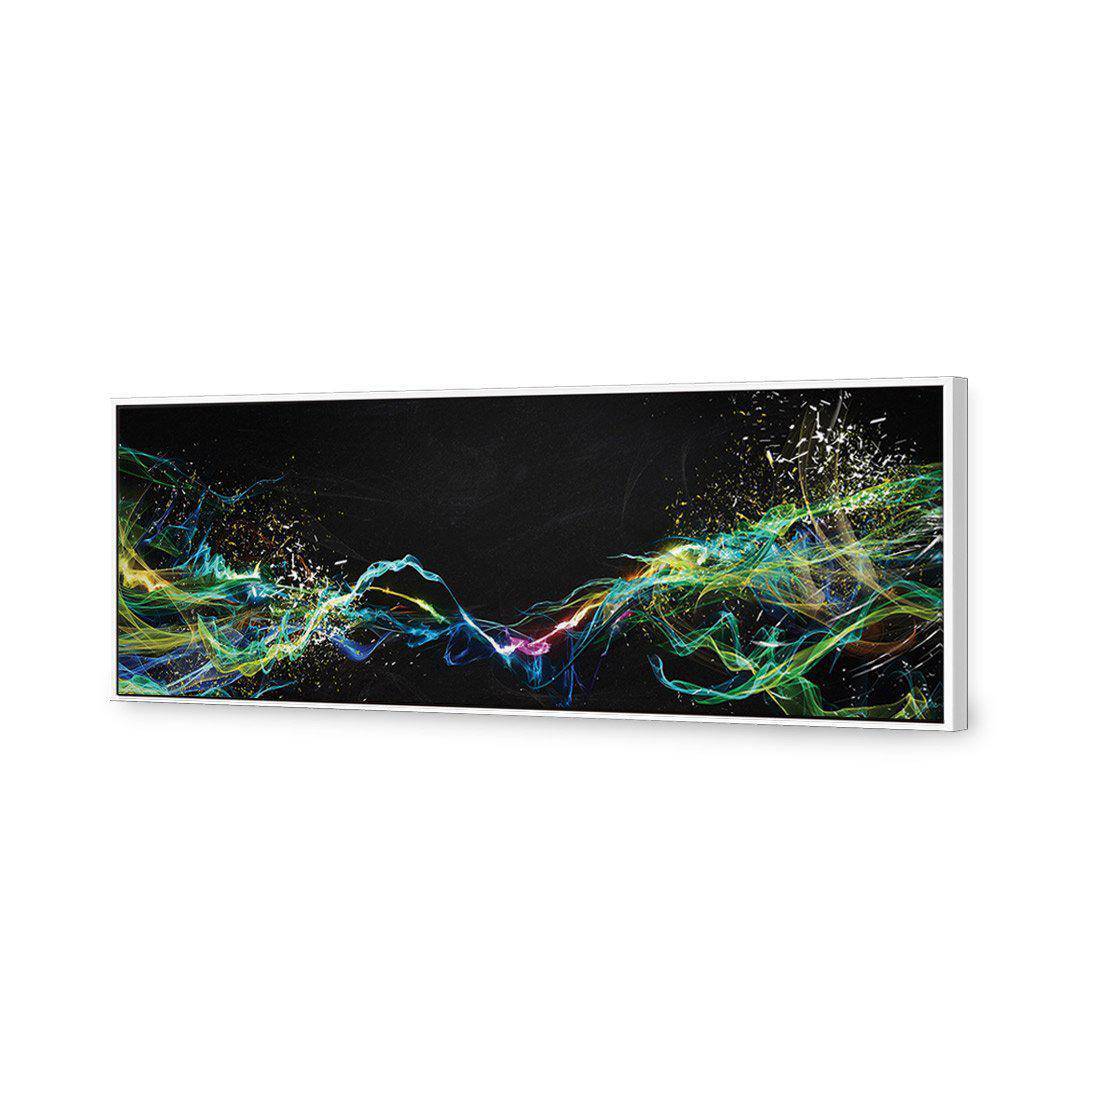 Electricity On Black Canvas Art-Canvas-Wall Art Designs-60x20cm-Canvas - White Frame-Wall Art Designs